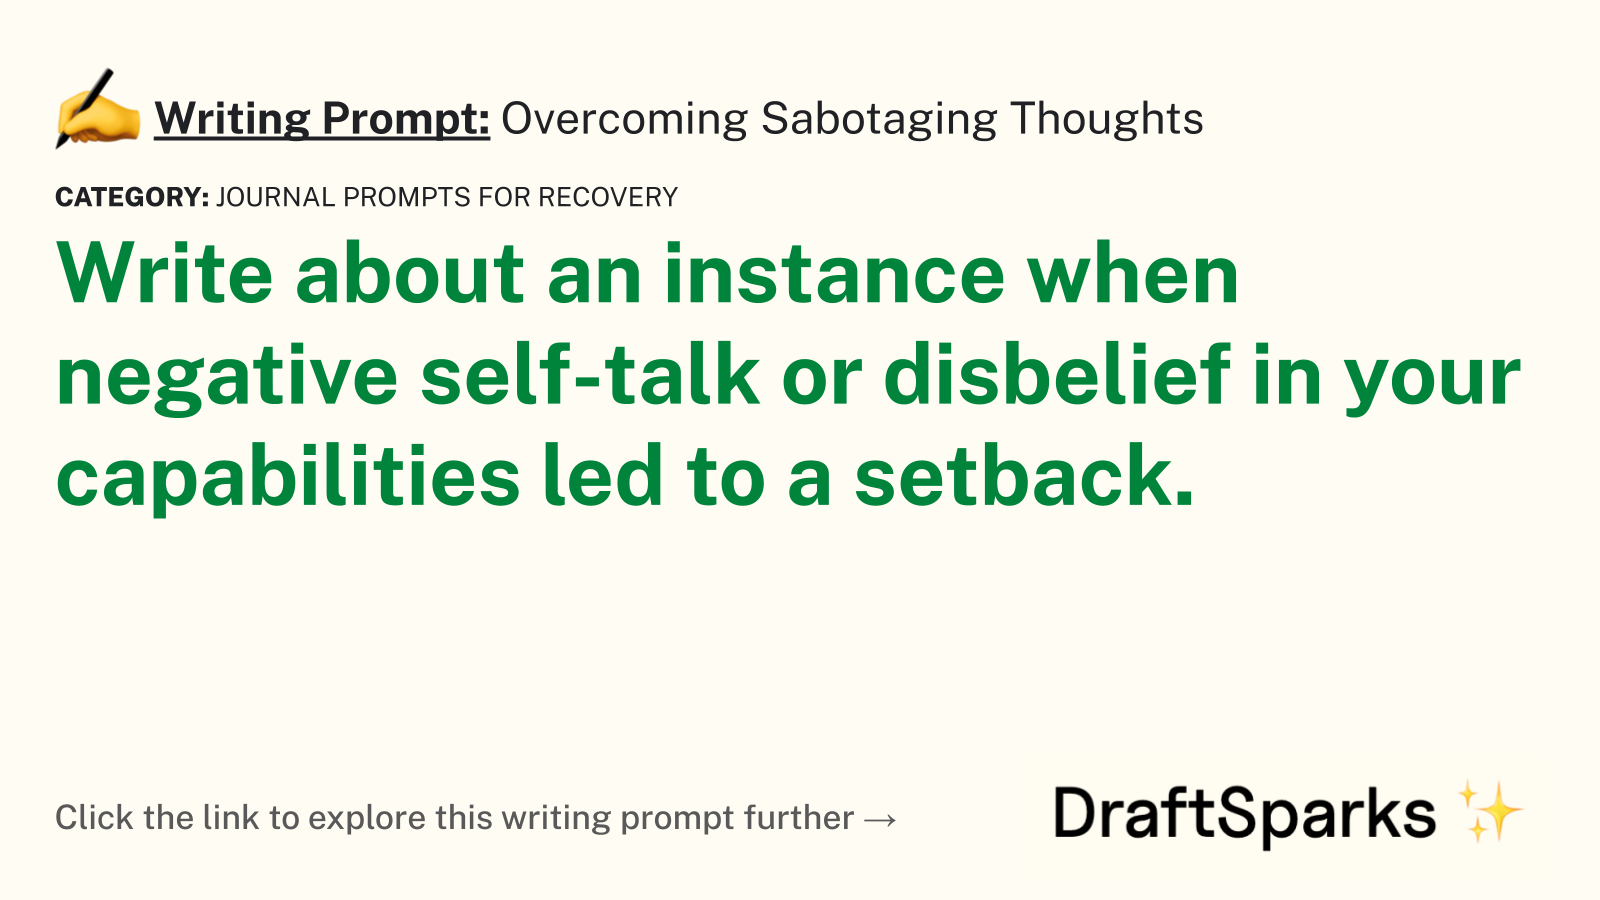 Overcoming Sabotaging Thoughts